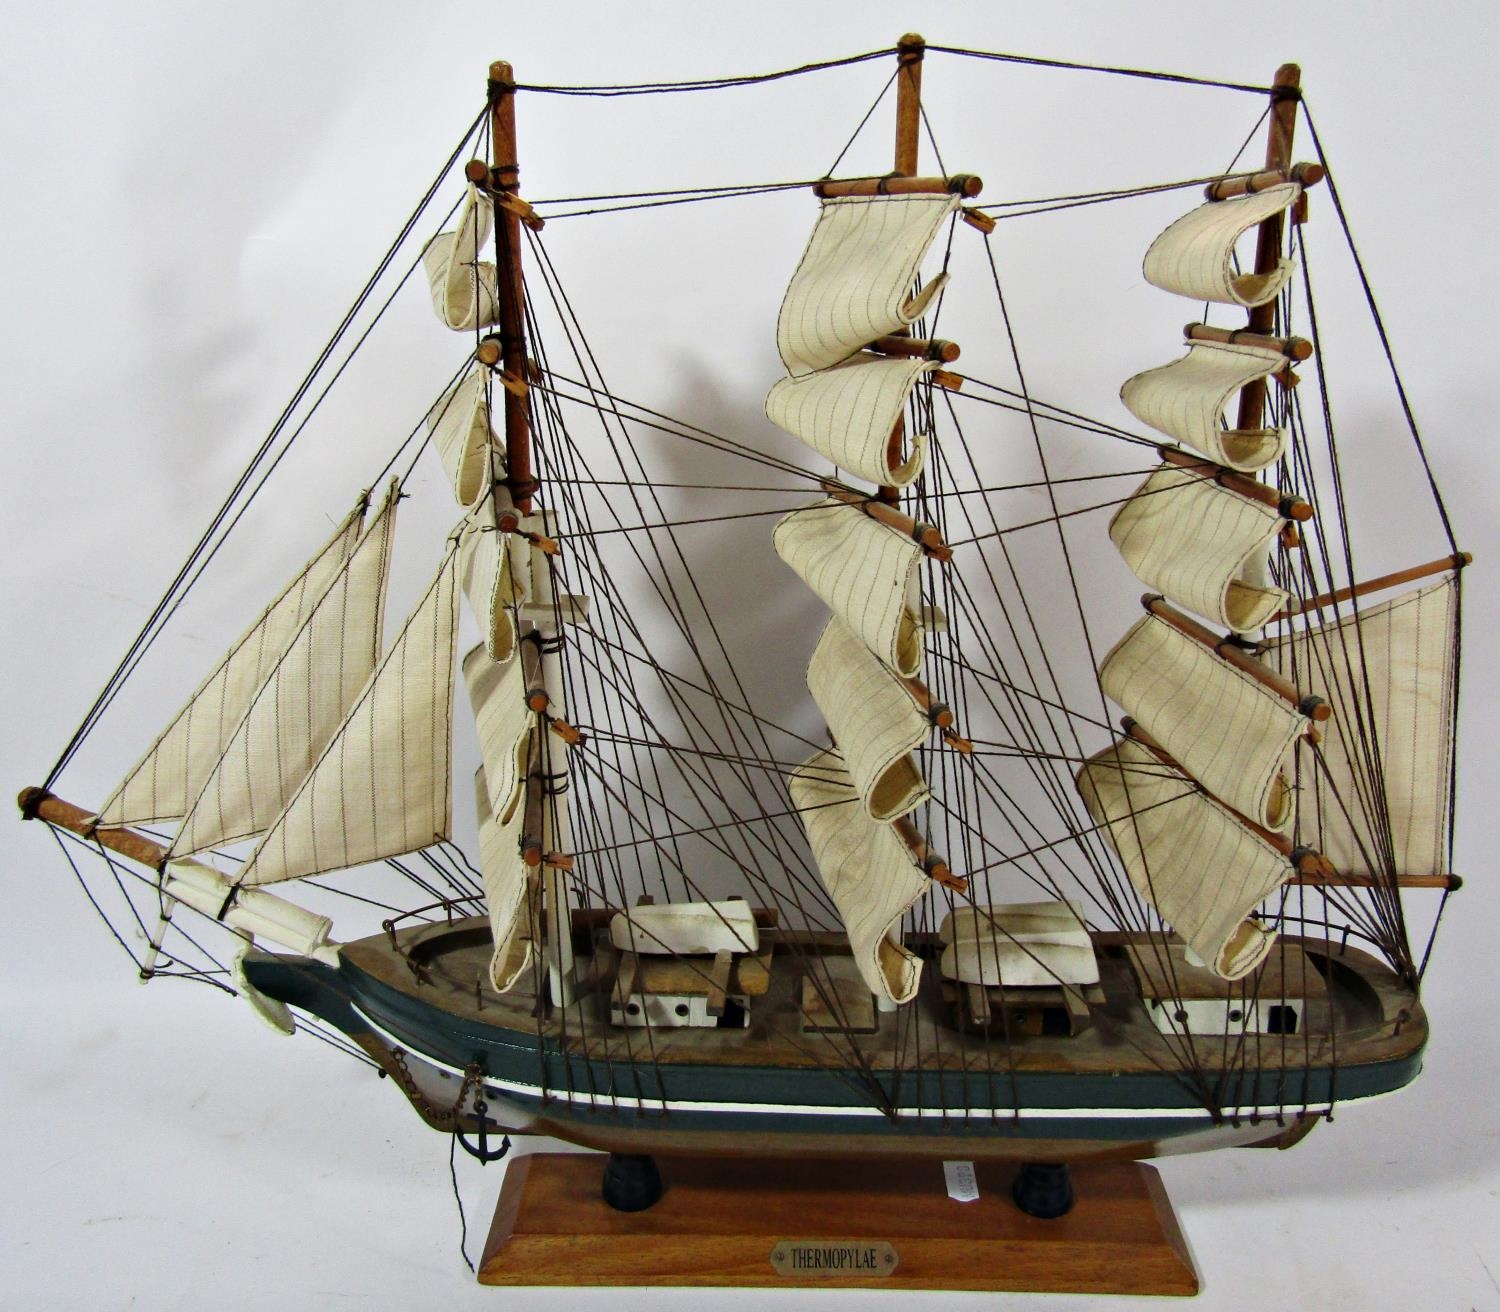 Wooden model of a sailing ship, The Thermopylae, raised on a wooden stand, 53cm long x 44cm high,